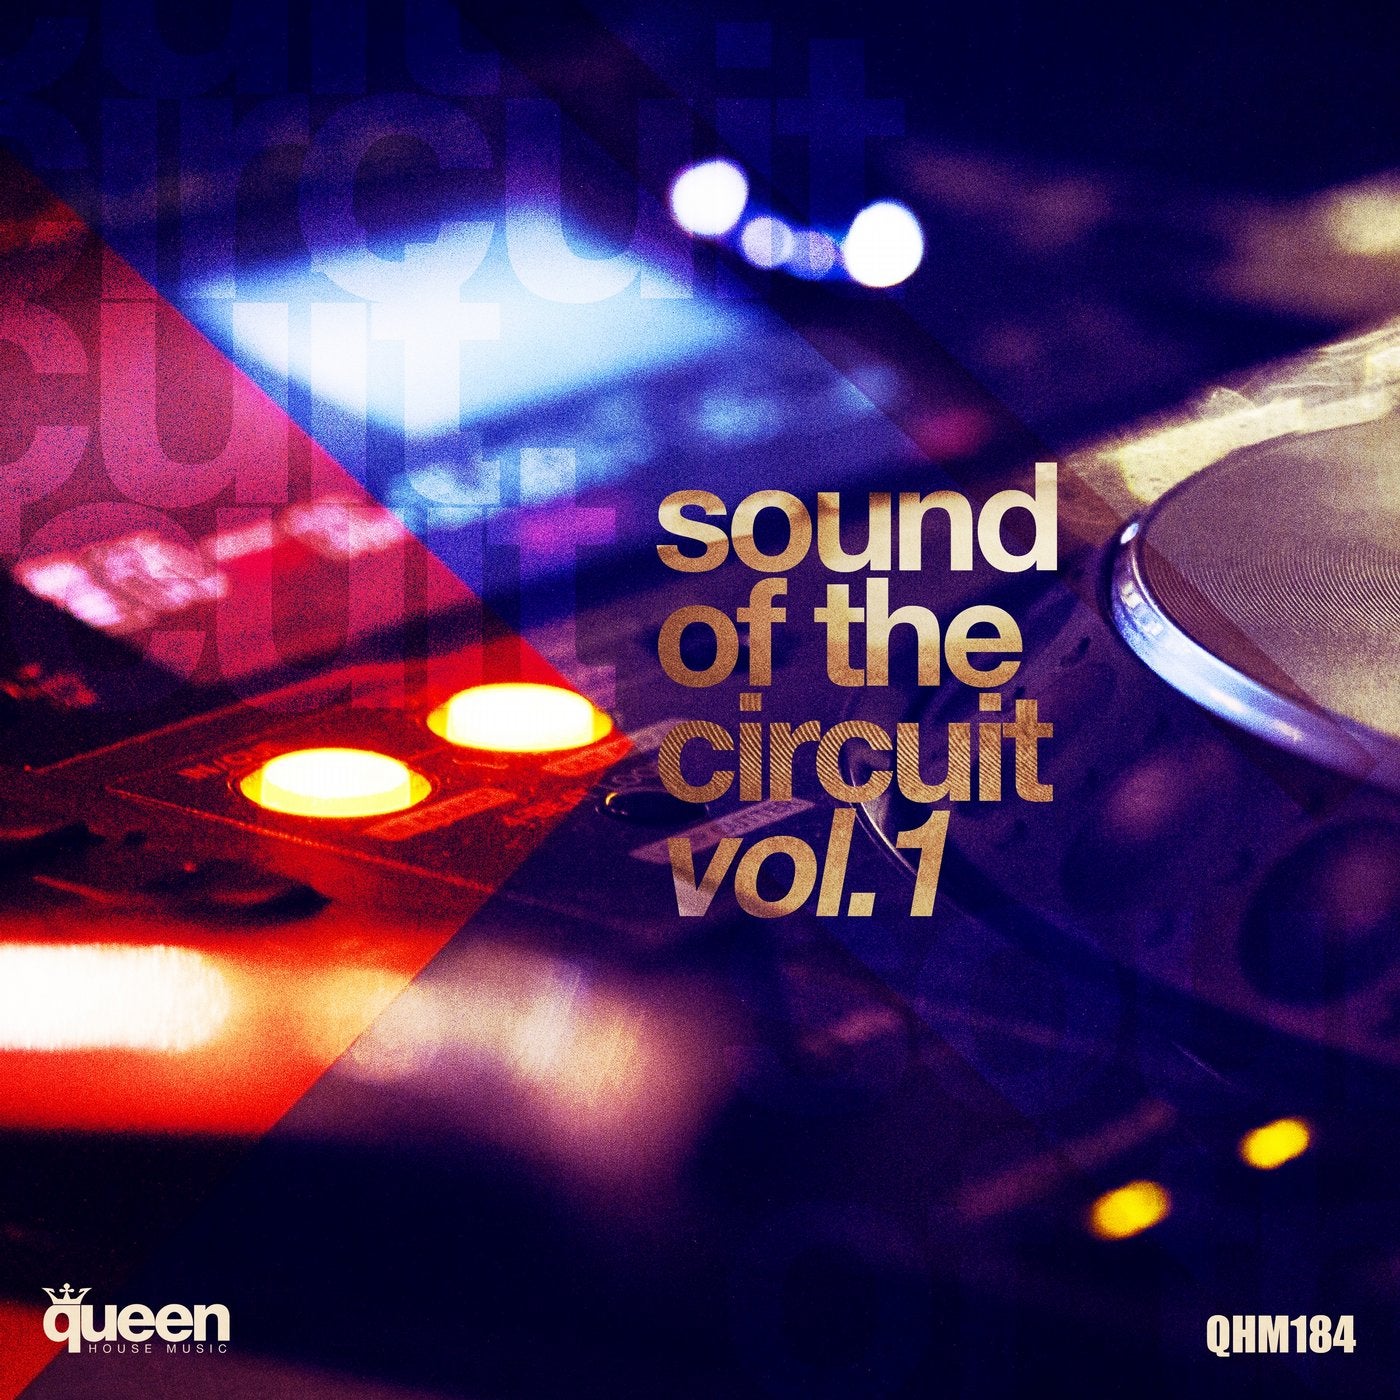 Sound of the Circuit, Vol 1